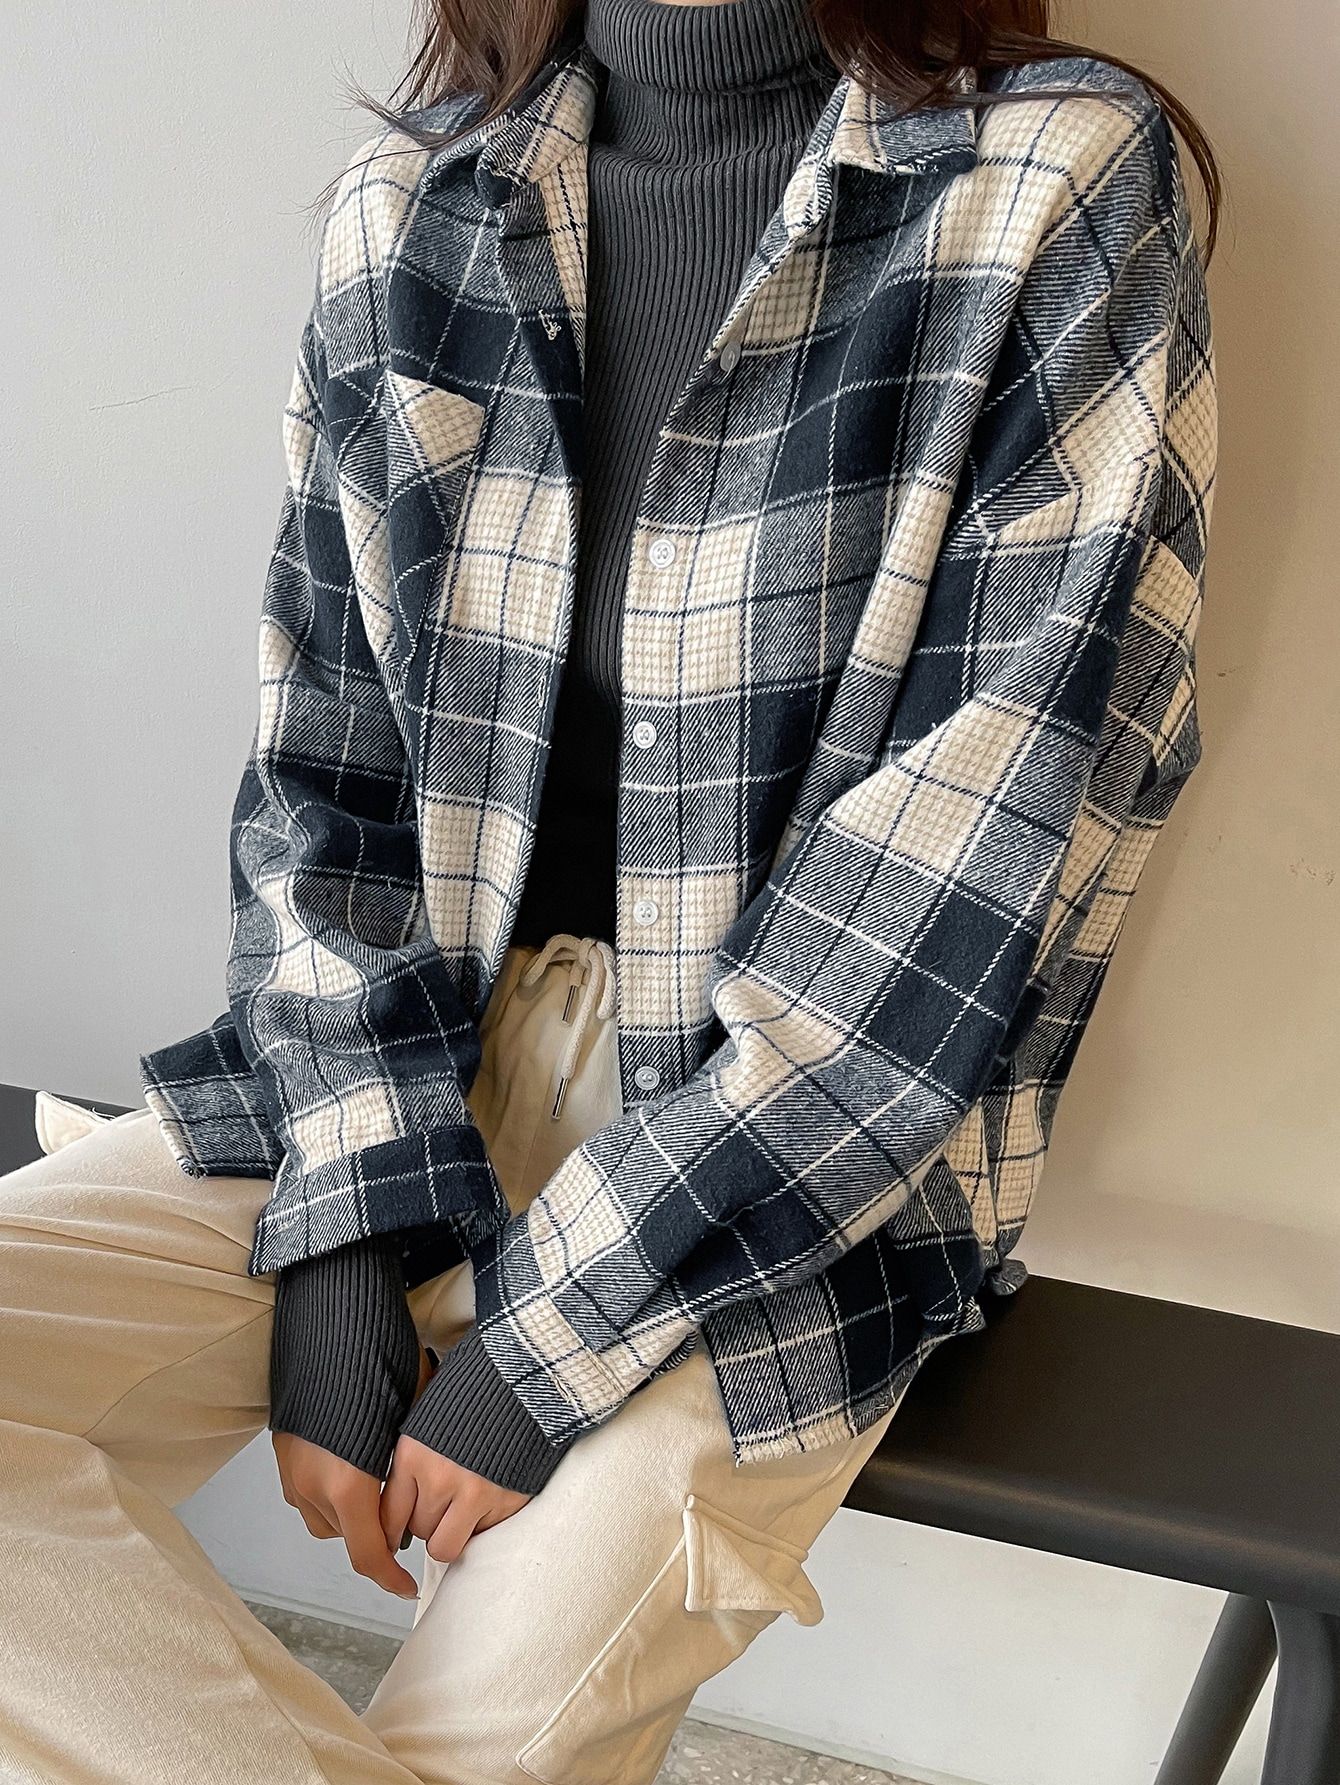 How to Wear Blue Plaid Shirt: Best 13 Stylish Outfit Ideas for Women